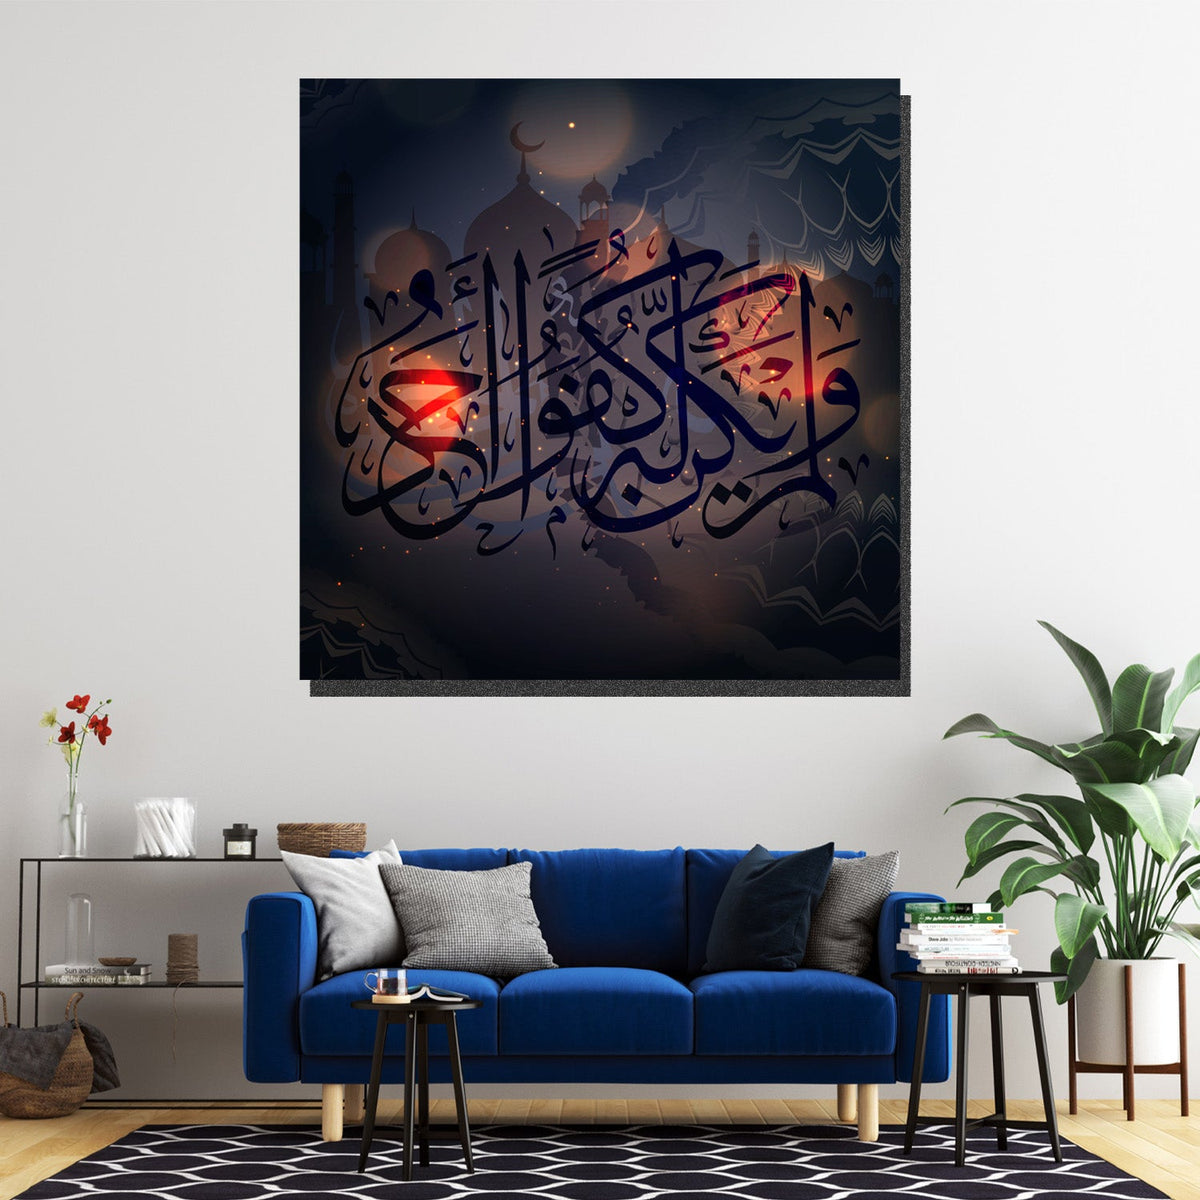 https://cdn.shopify.com/s/files/1/0387/9986/8044/products/QuranSurahAl-Ihlas112CanvasArtprintStretched-3.jpg